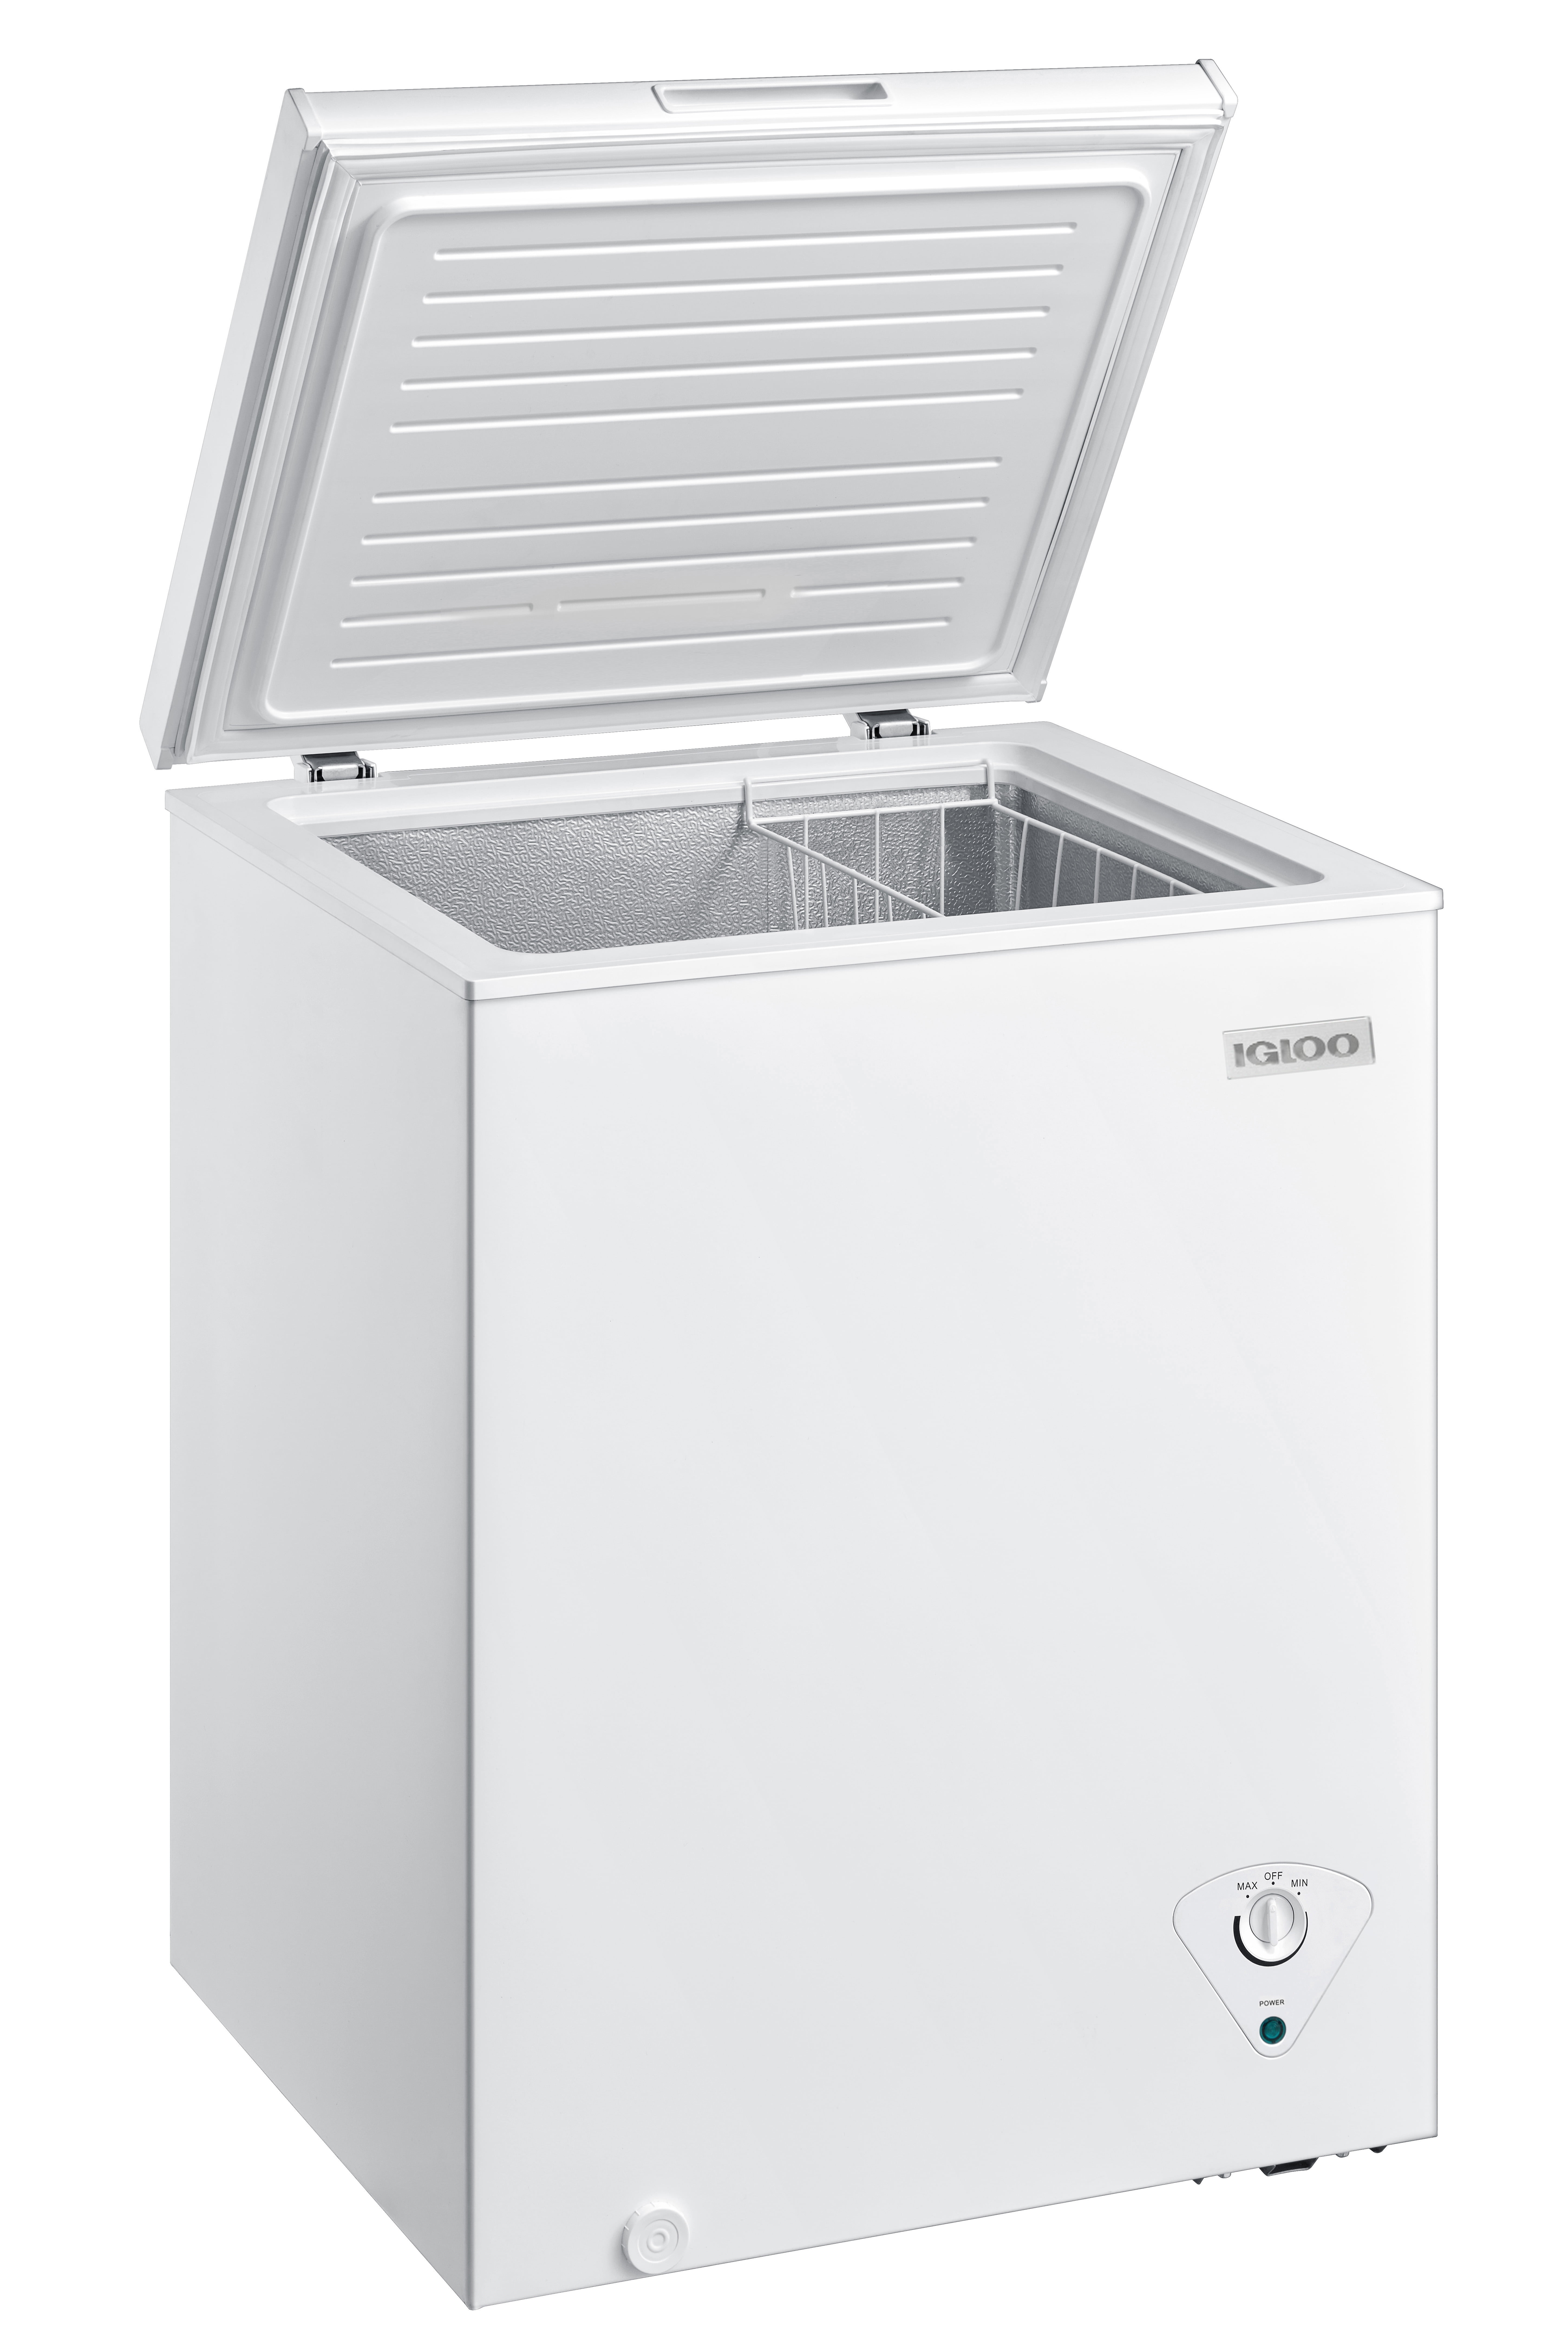 Igloo ICFMD35WH6A 3.5 Cubic Foot Chest Freezer - 9802893